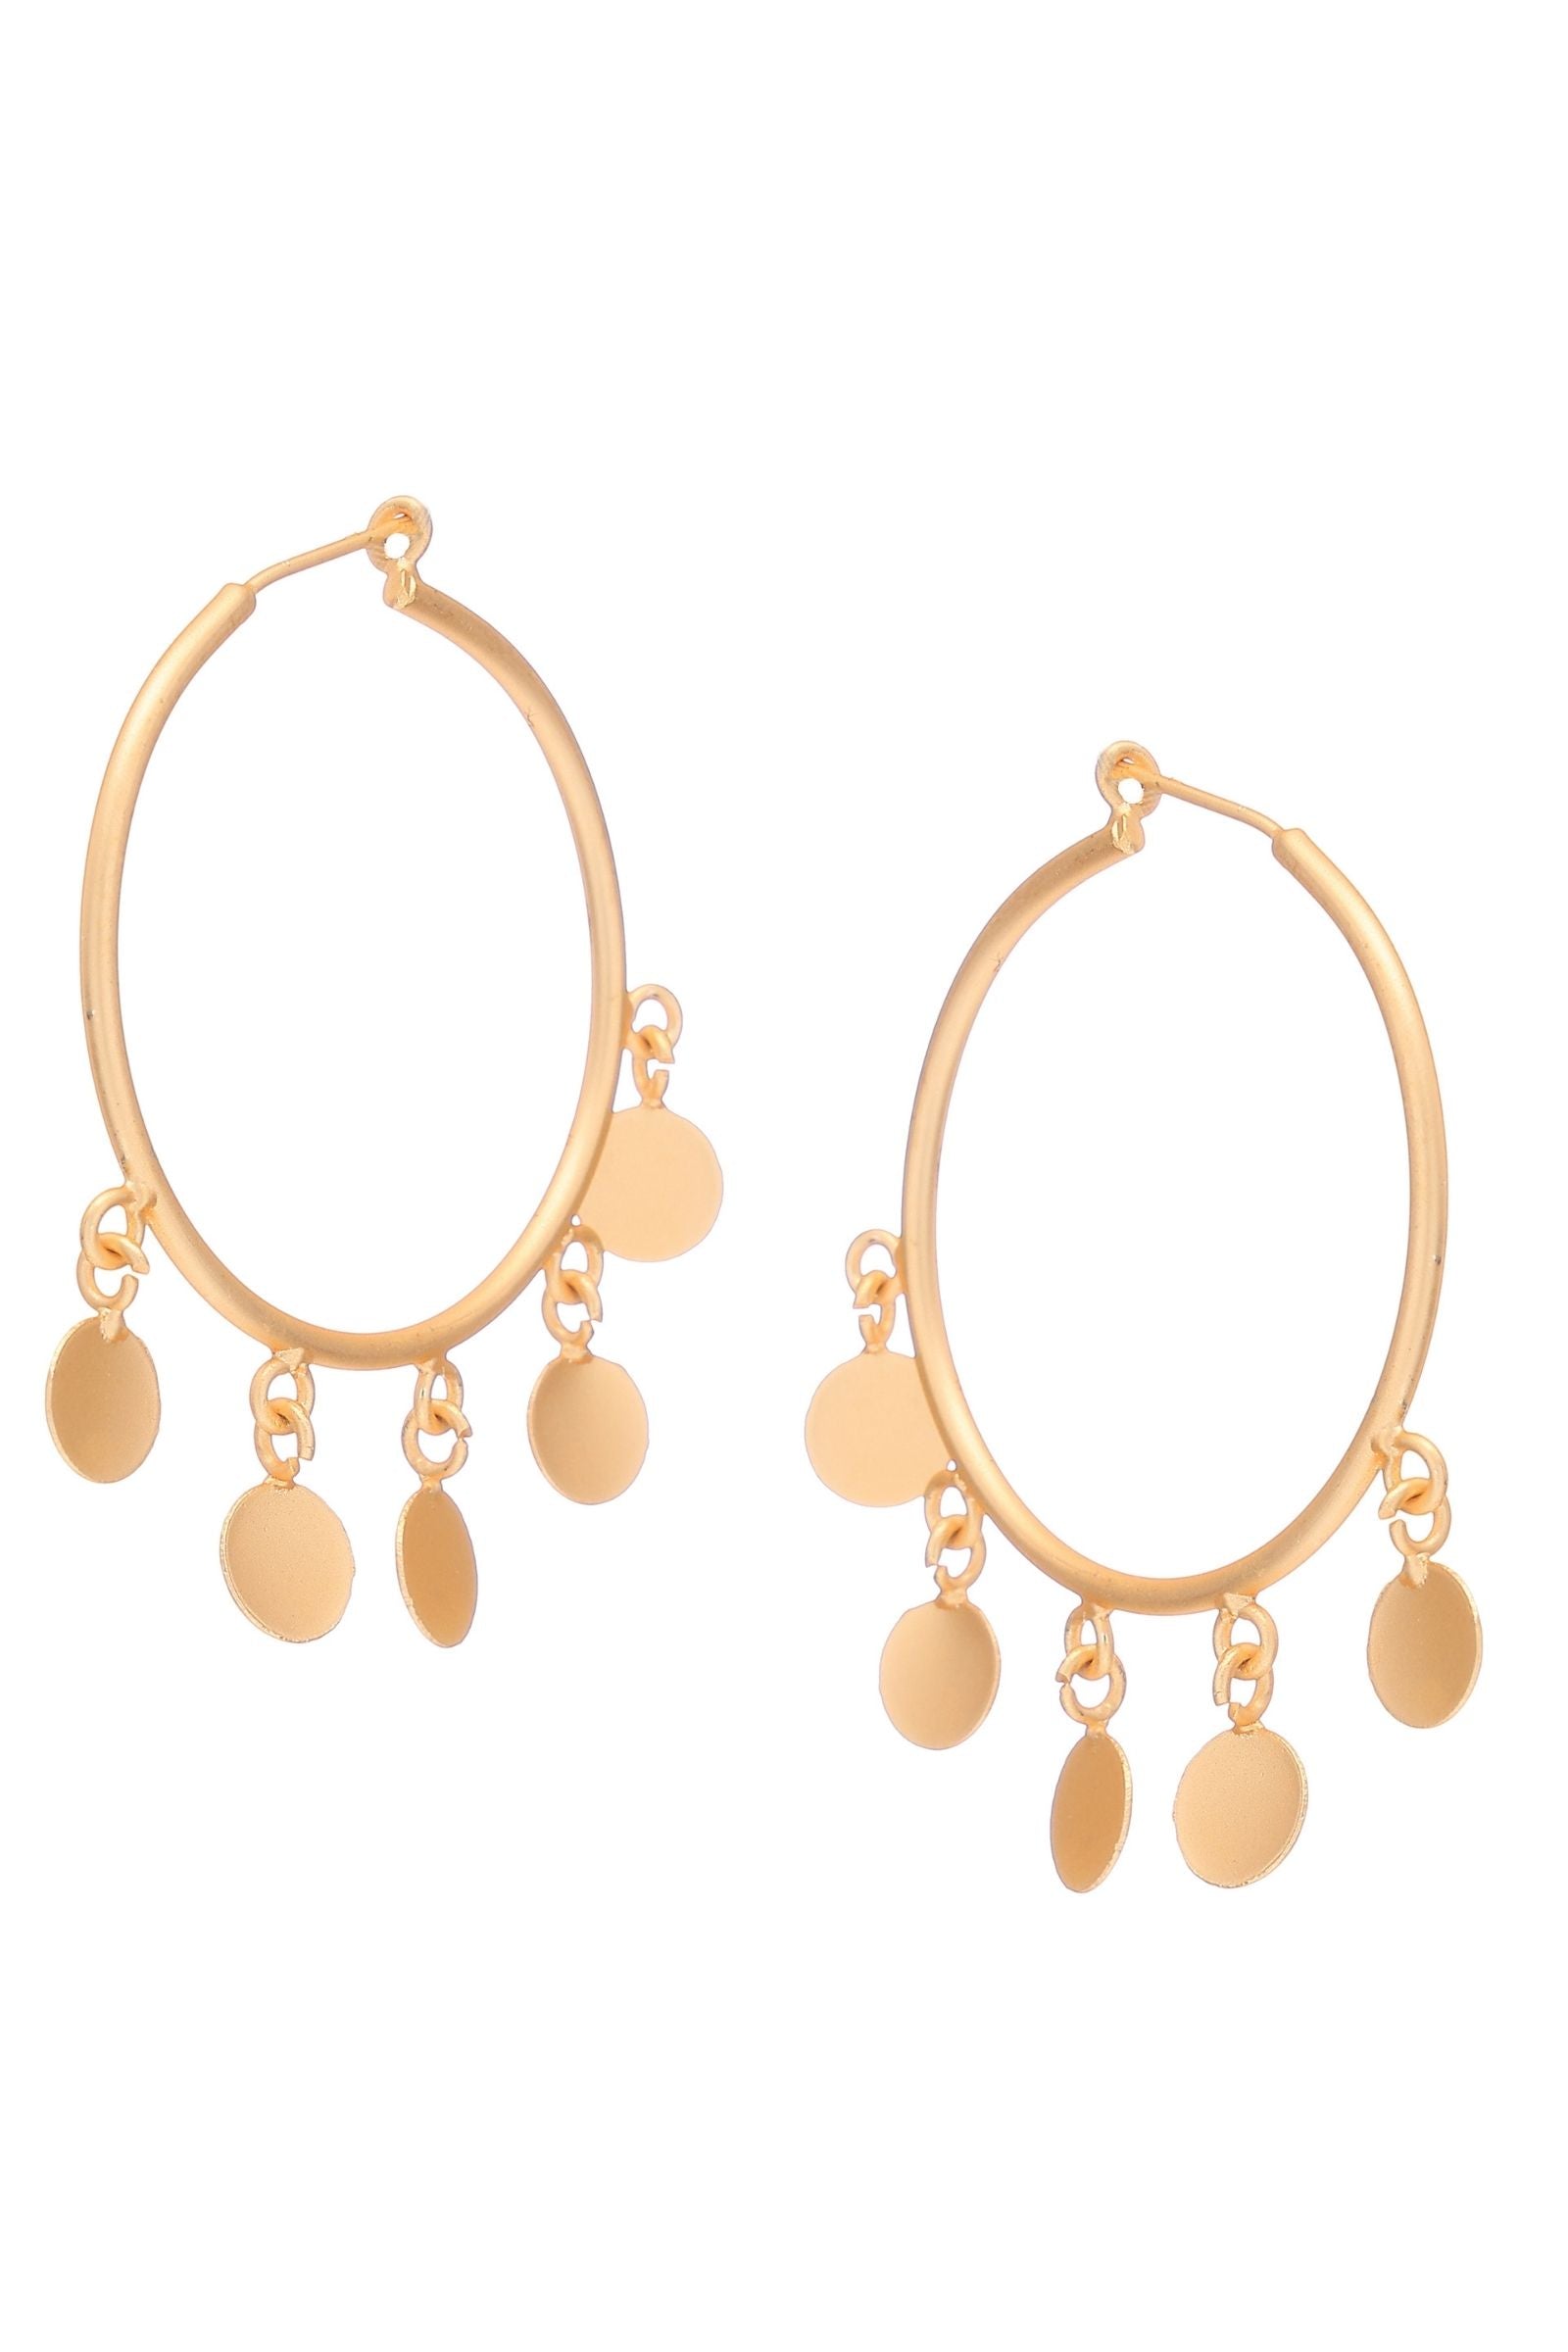 Gold Hoops with Small Hoops